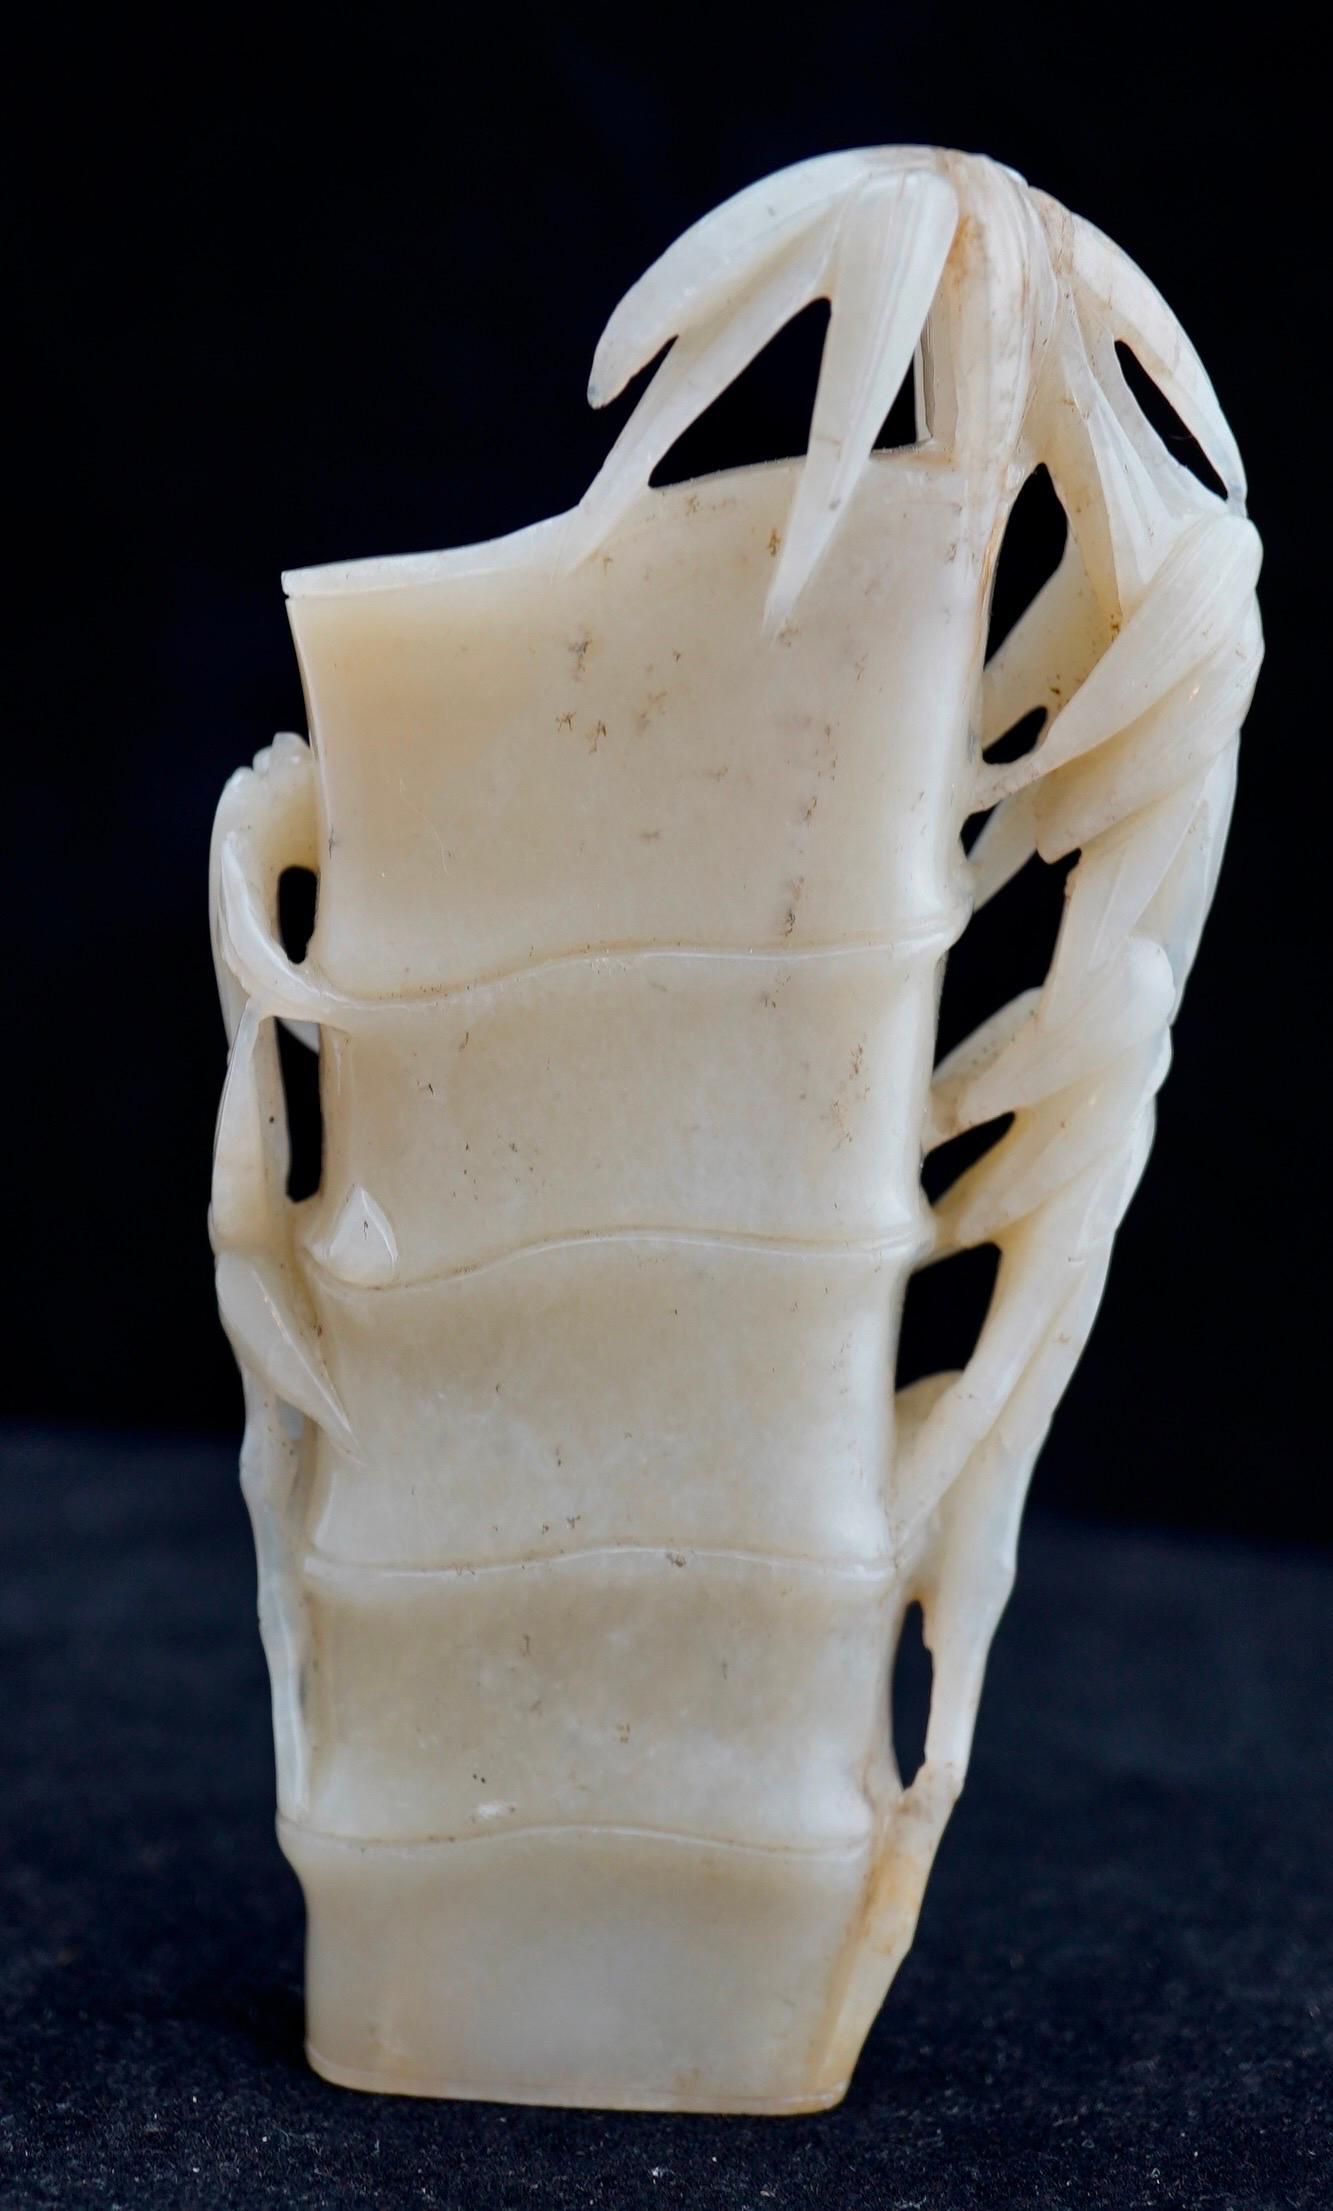 Chinese white jade carved vase in the form of the bamboo tree with leafs and trunk. Late 19th century.